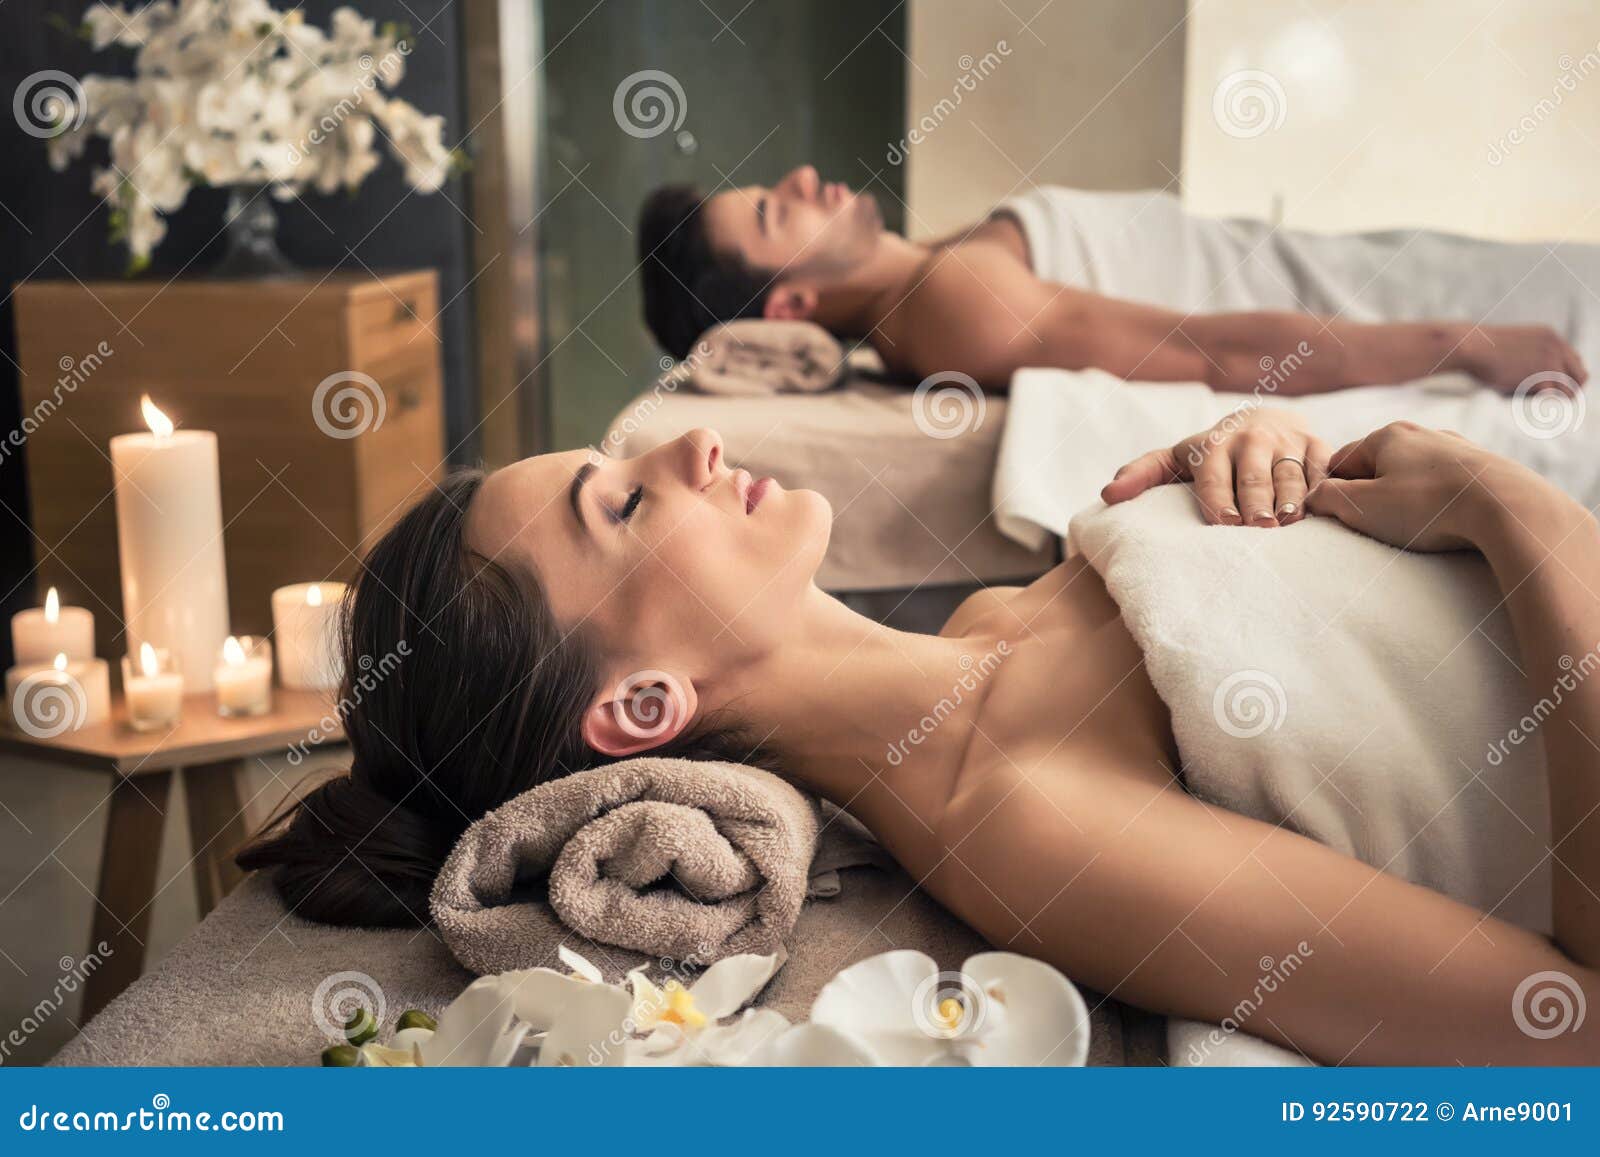 man and woman lying down on massage beds at asian wellness center